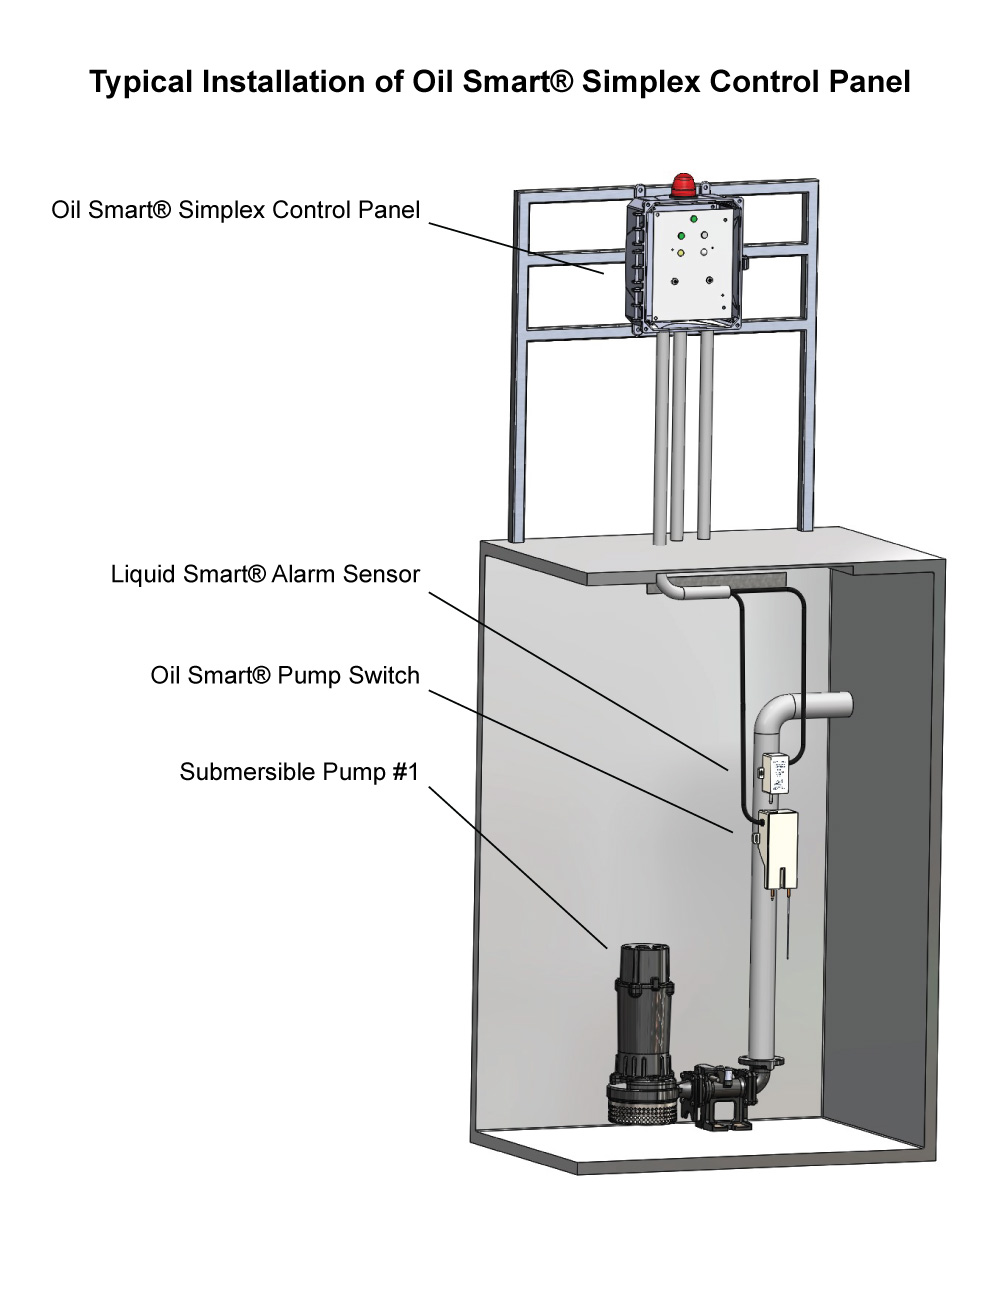 Typical Application: Single Phase Simplex OSSIM-30